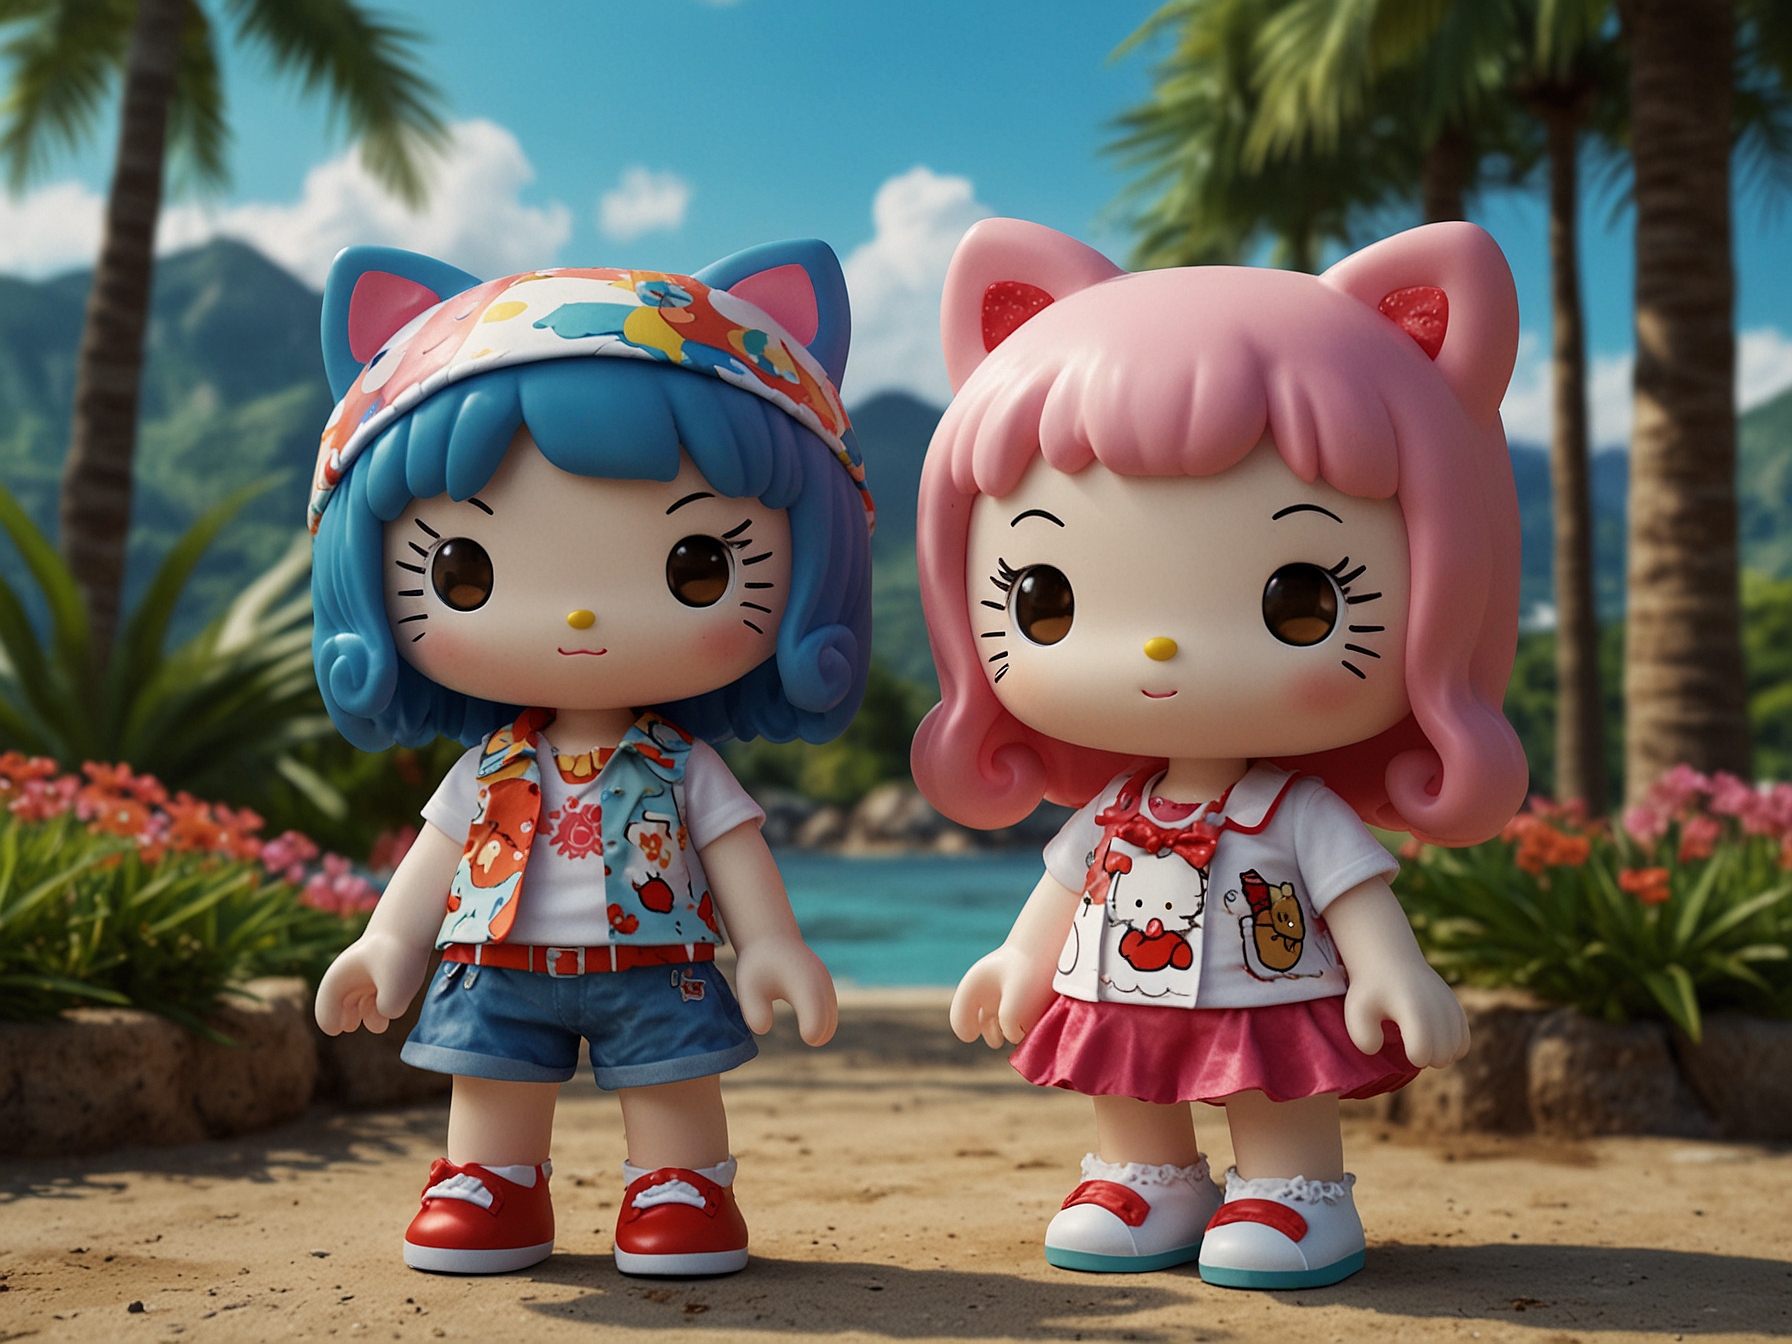 Customized avatars wearing trendy summer outfits in Hello Kitty Island Adventure. The new Update 1.8 introduces a brand-new avatar type with more self-expression options, outfits, accessories, and hairstyles.